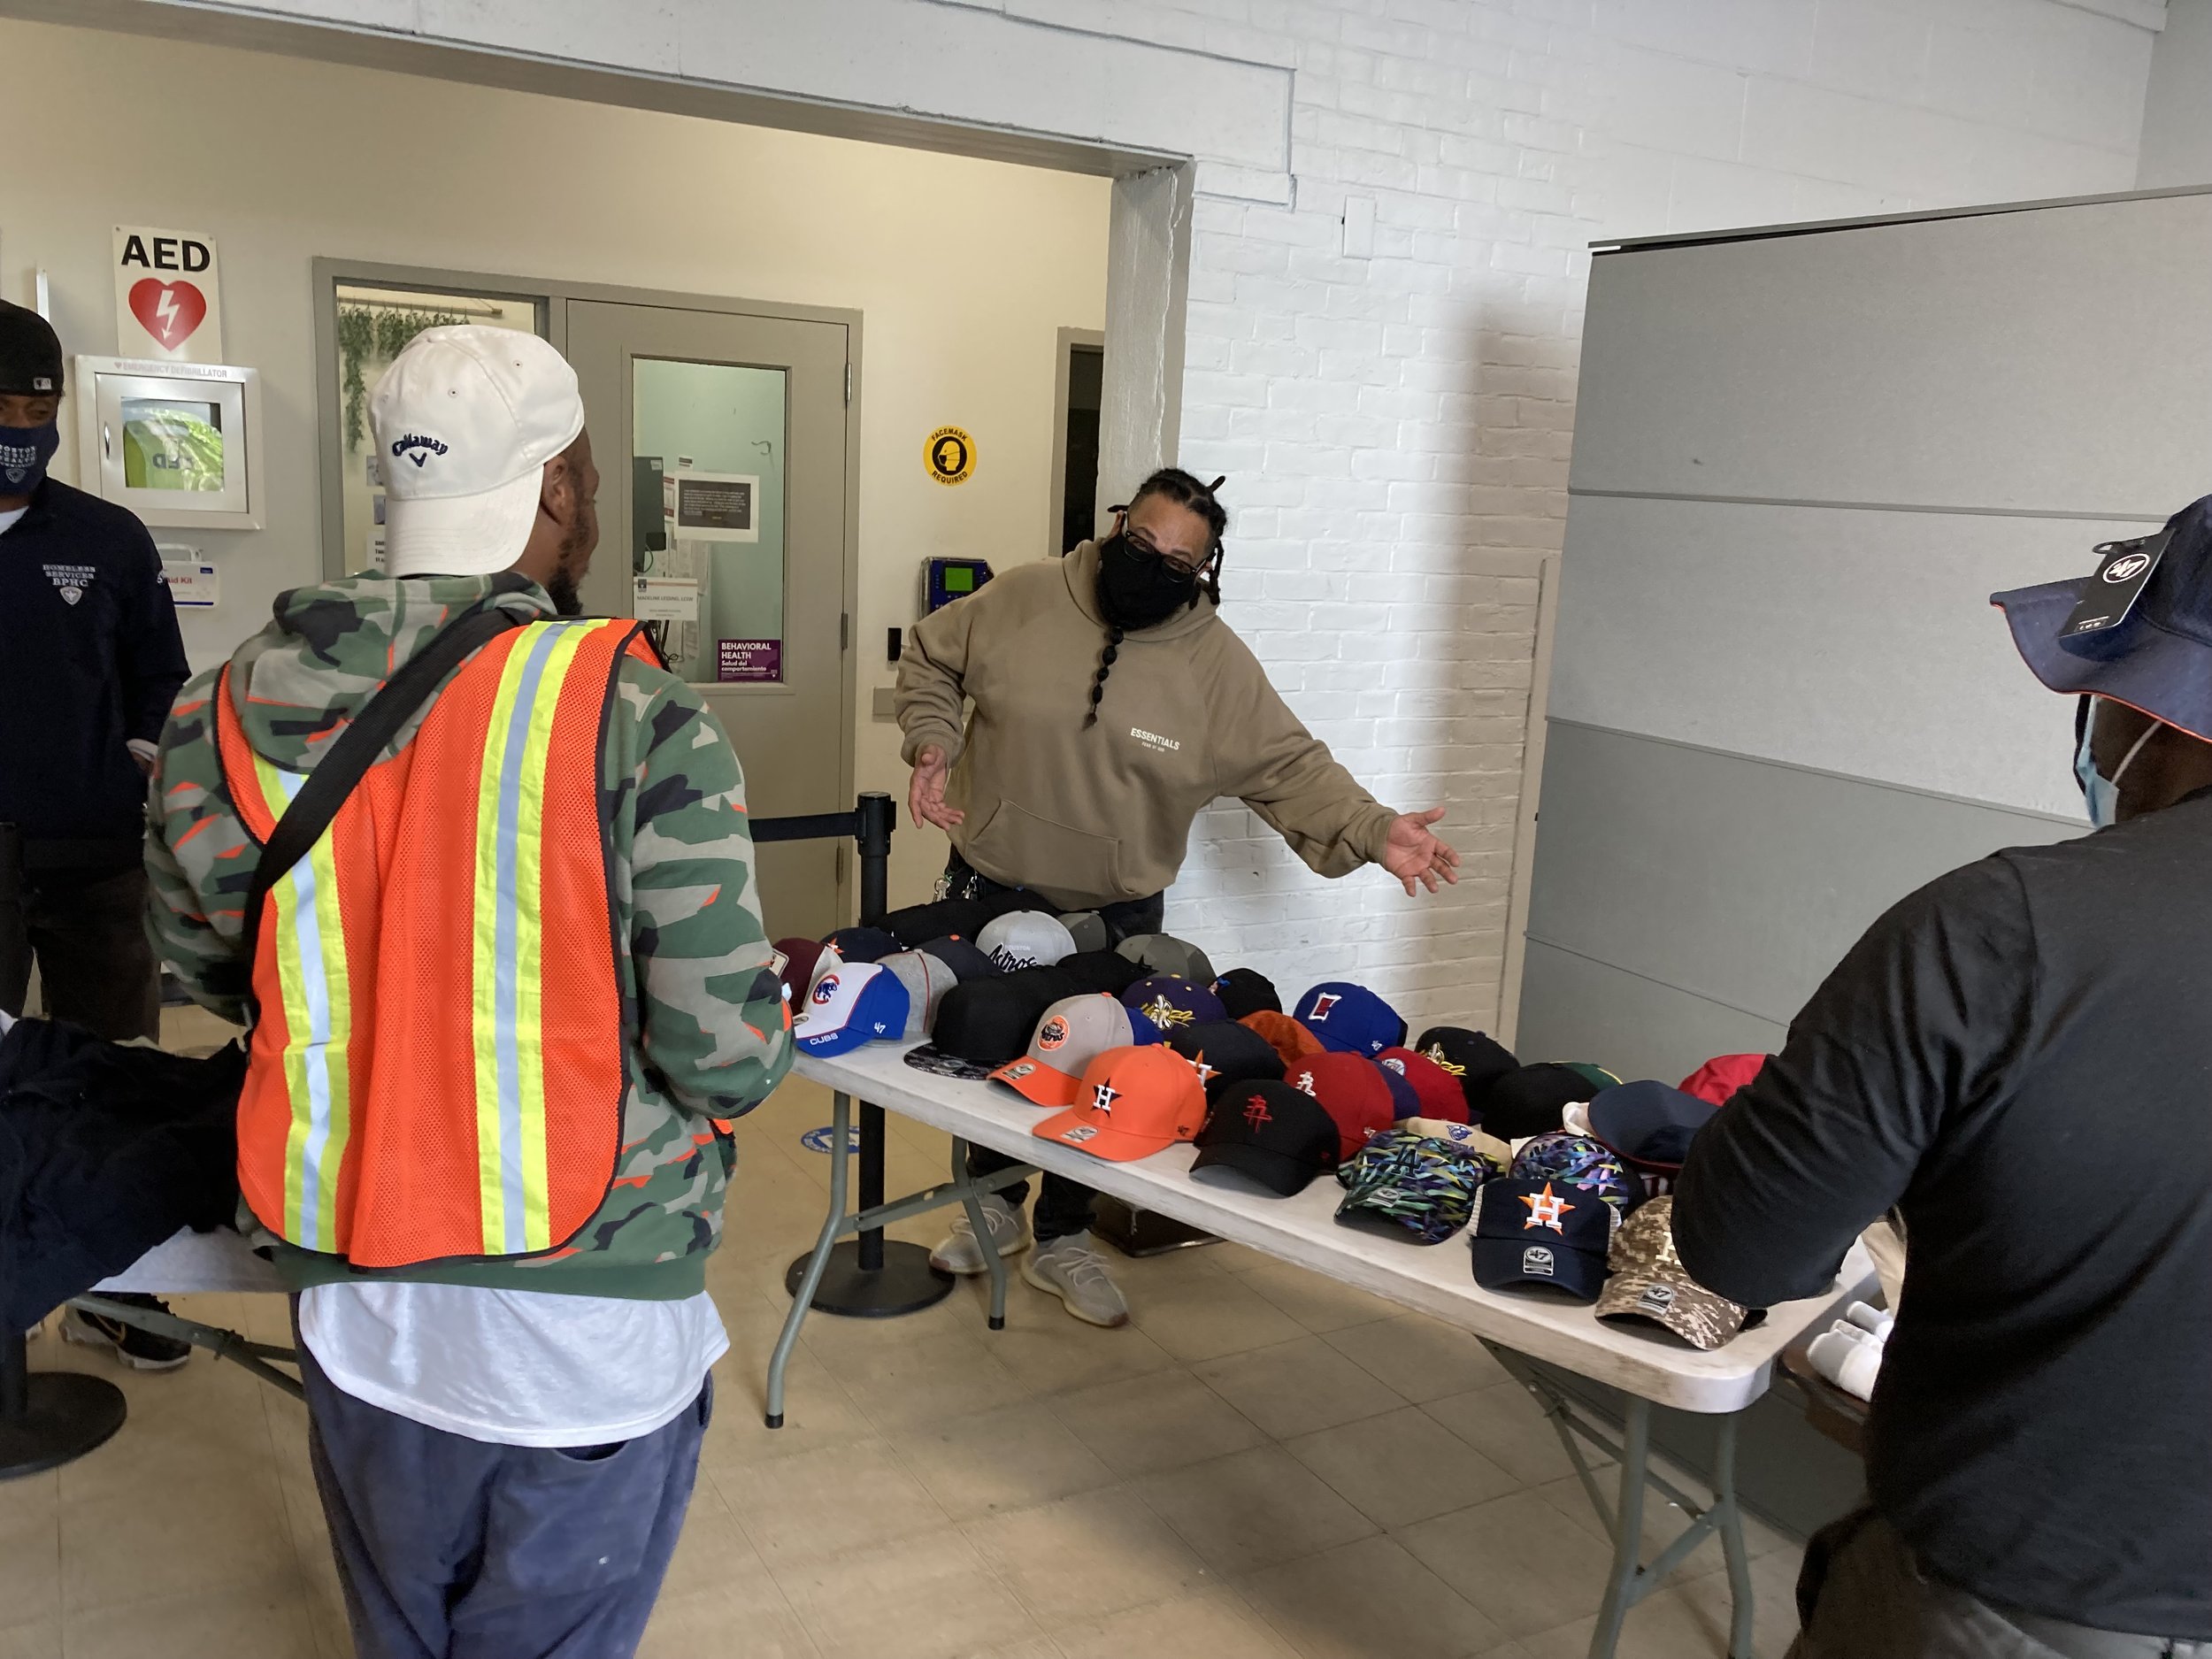  With support from our generous donors, including 47 and Charles River Apparel, COH gave summer essentials like shorts, T-shirts, and hats to guests at Southampton Street Shelter for men in Boston. 